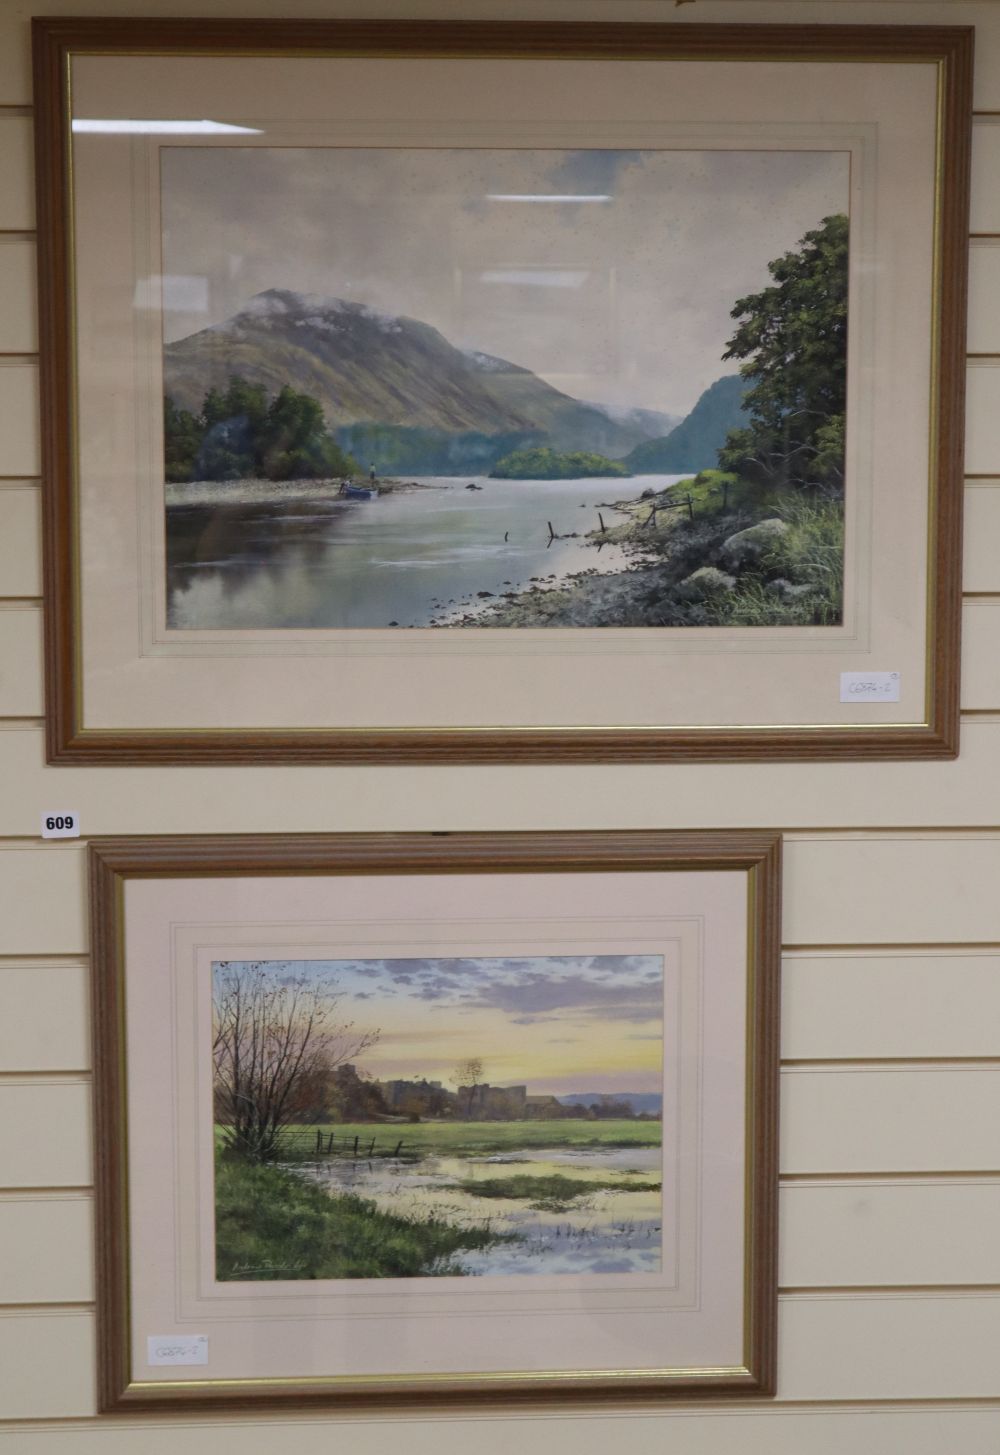 Andrew Dandridge, two watercolours, Amberley Sunset and Across Thirlmere to Helvellyn, Cumbria, both signed, 28 x 38cm and 39 x 56cm